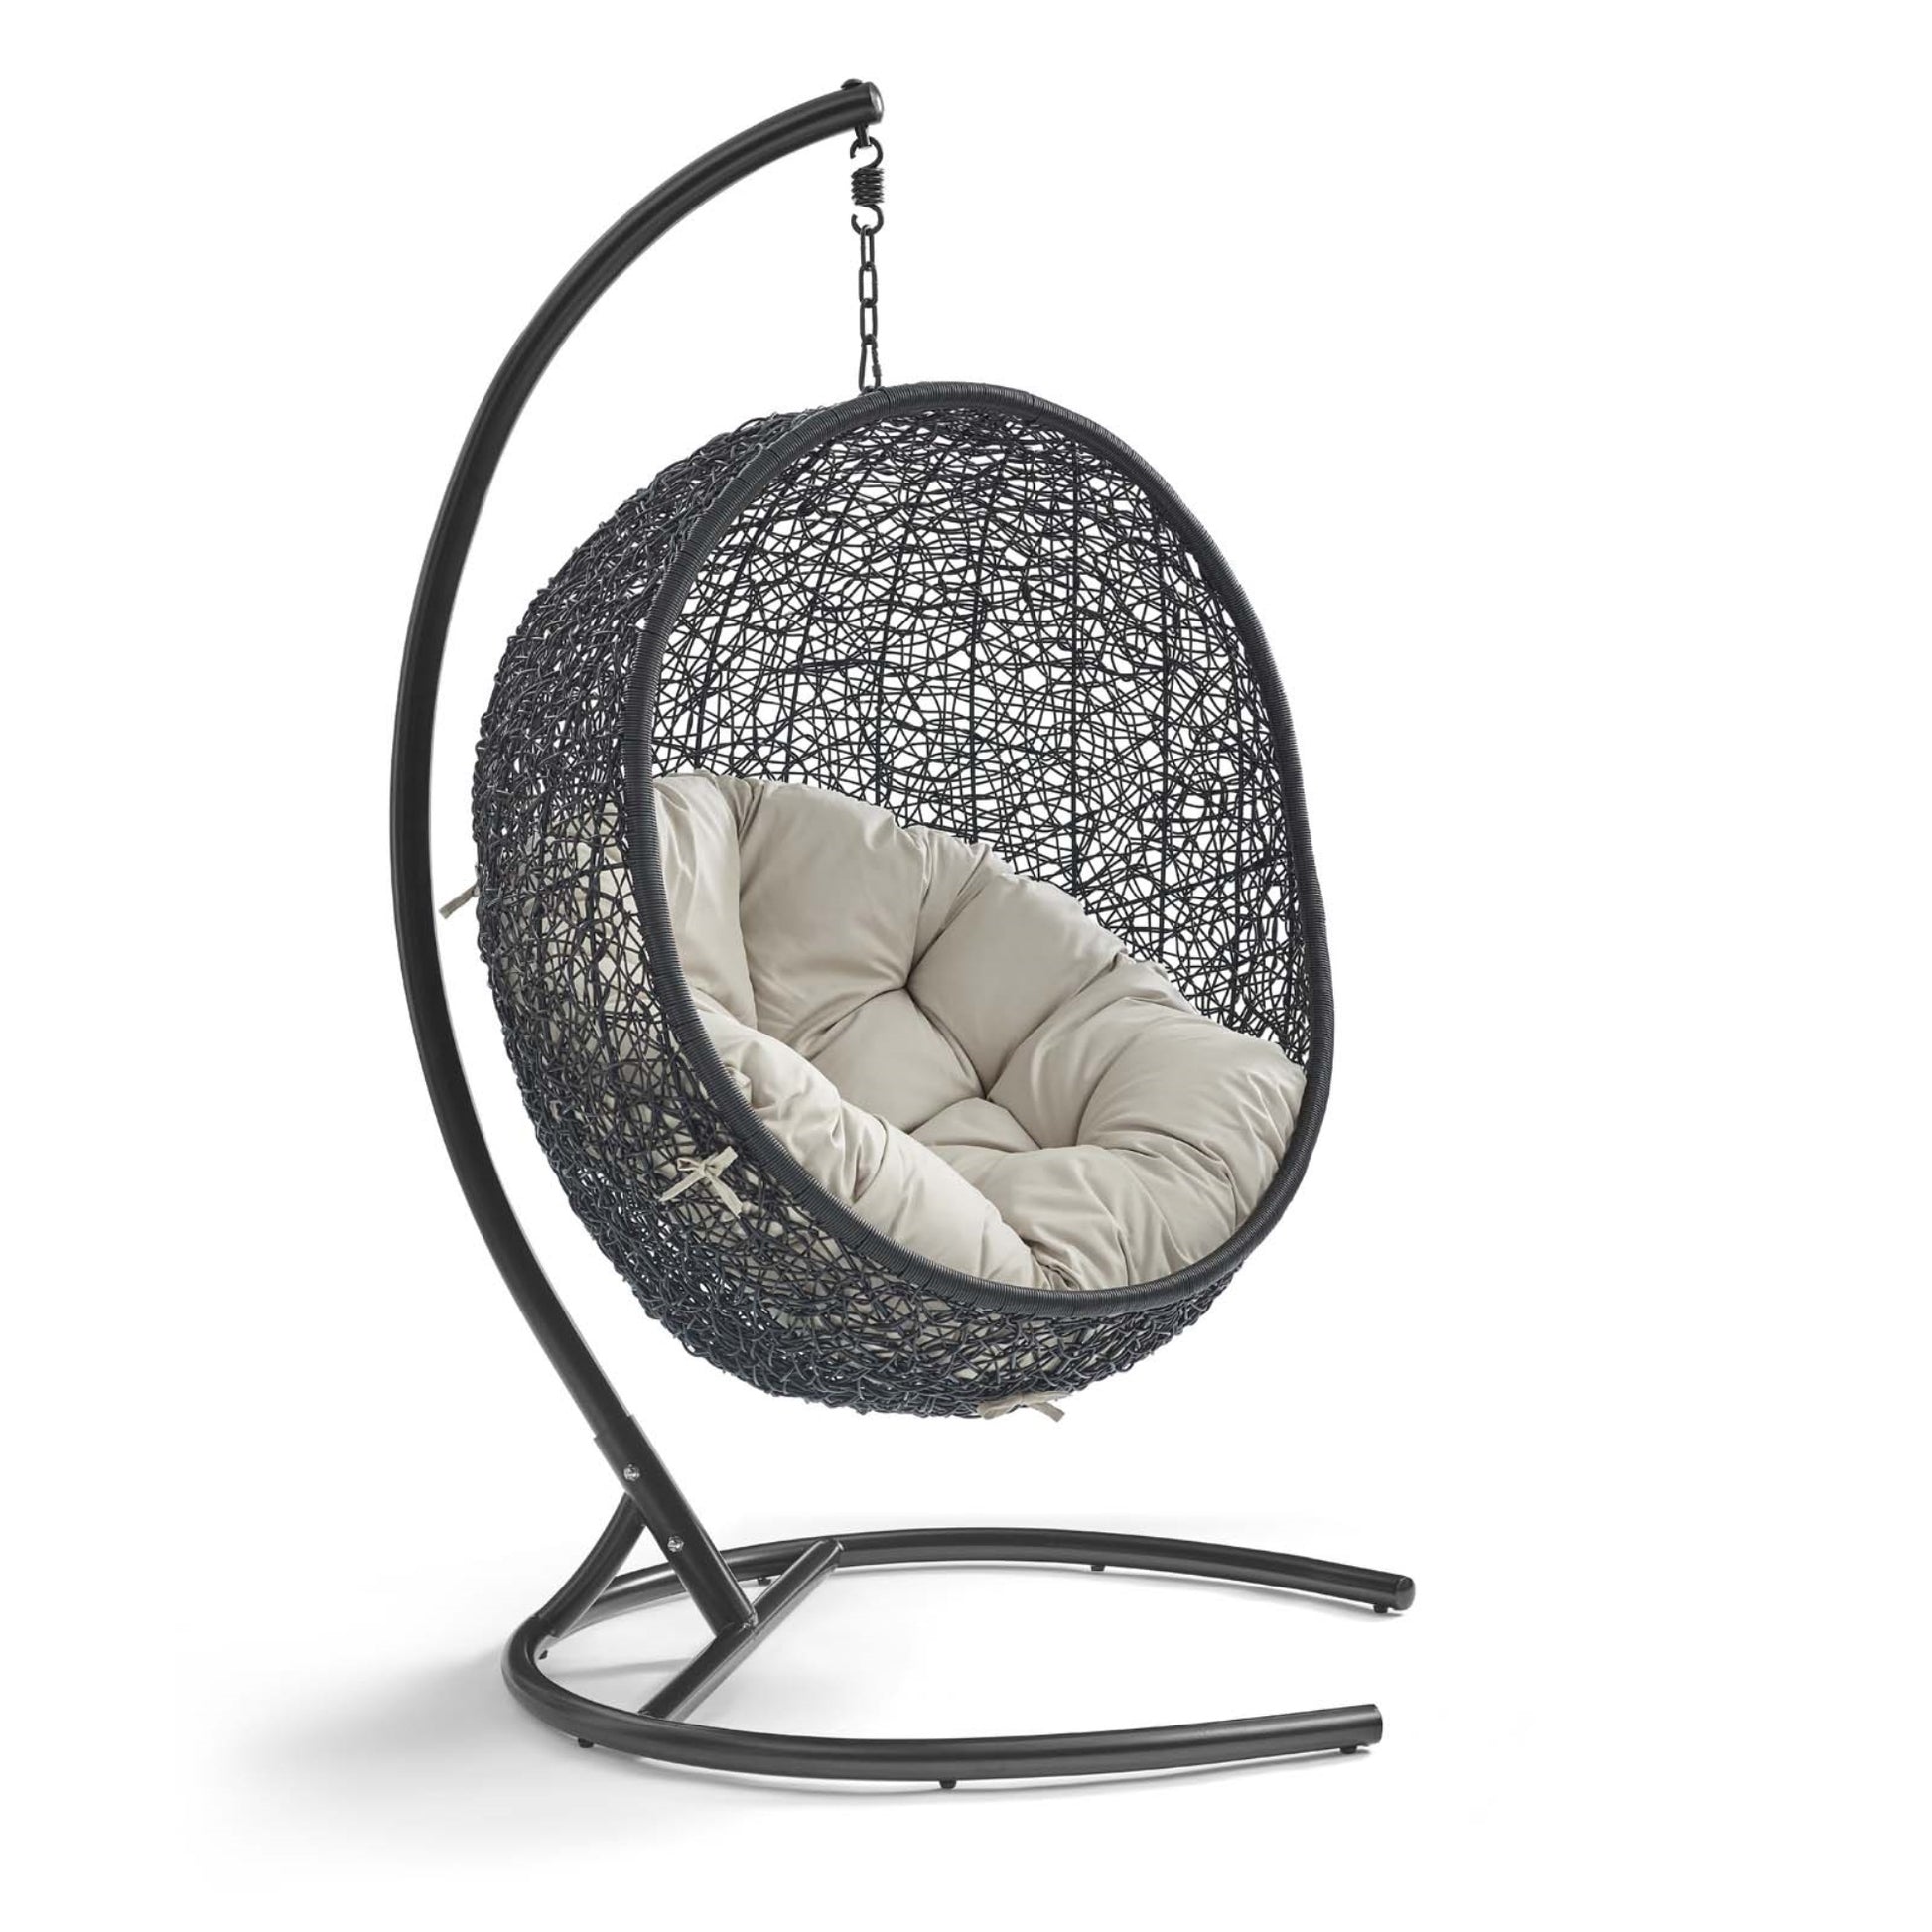 Ergode Encase Outdoor Swing Chair - Transformative Hanging Patio Lounge Chair with Metal Stand and Rattan Seat - Beige